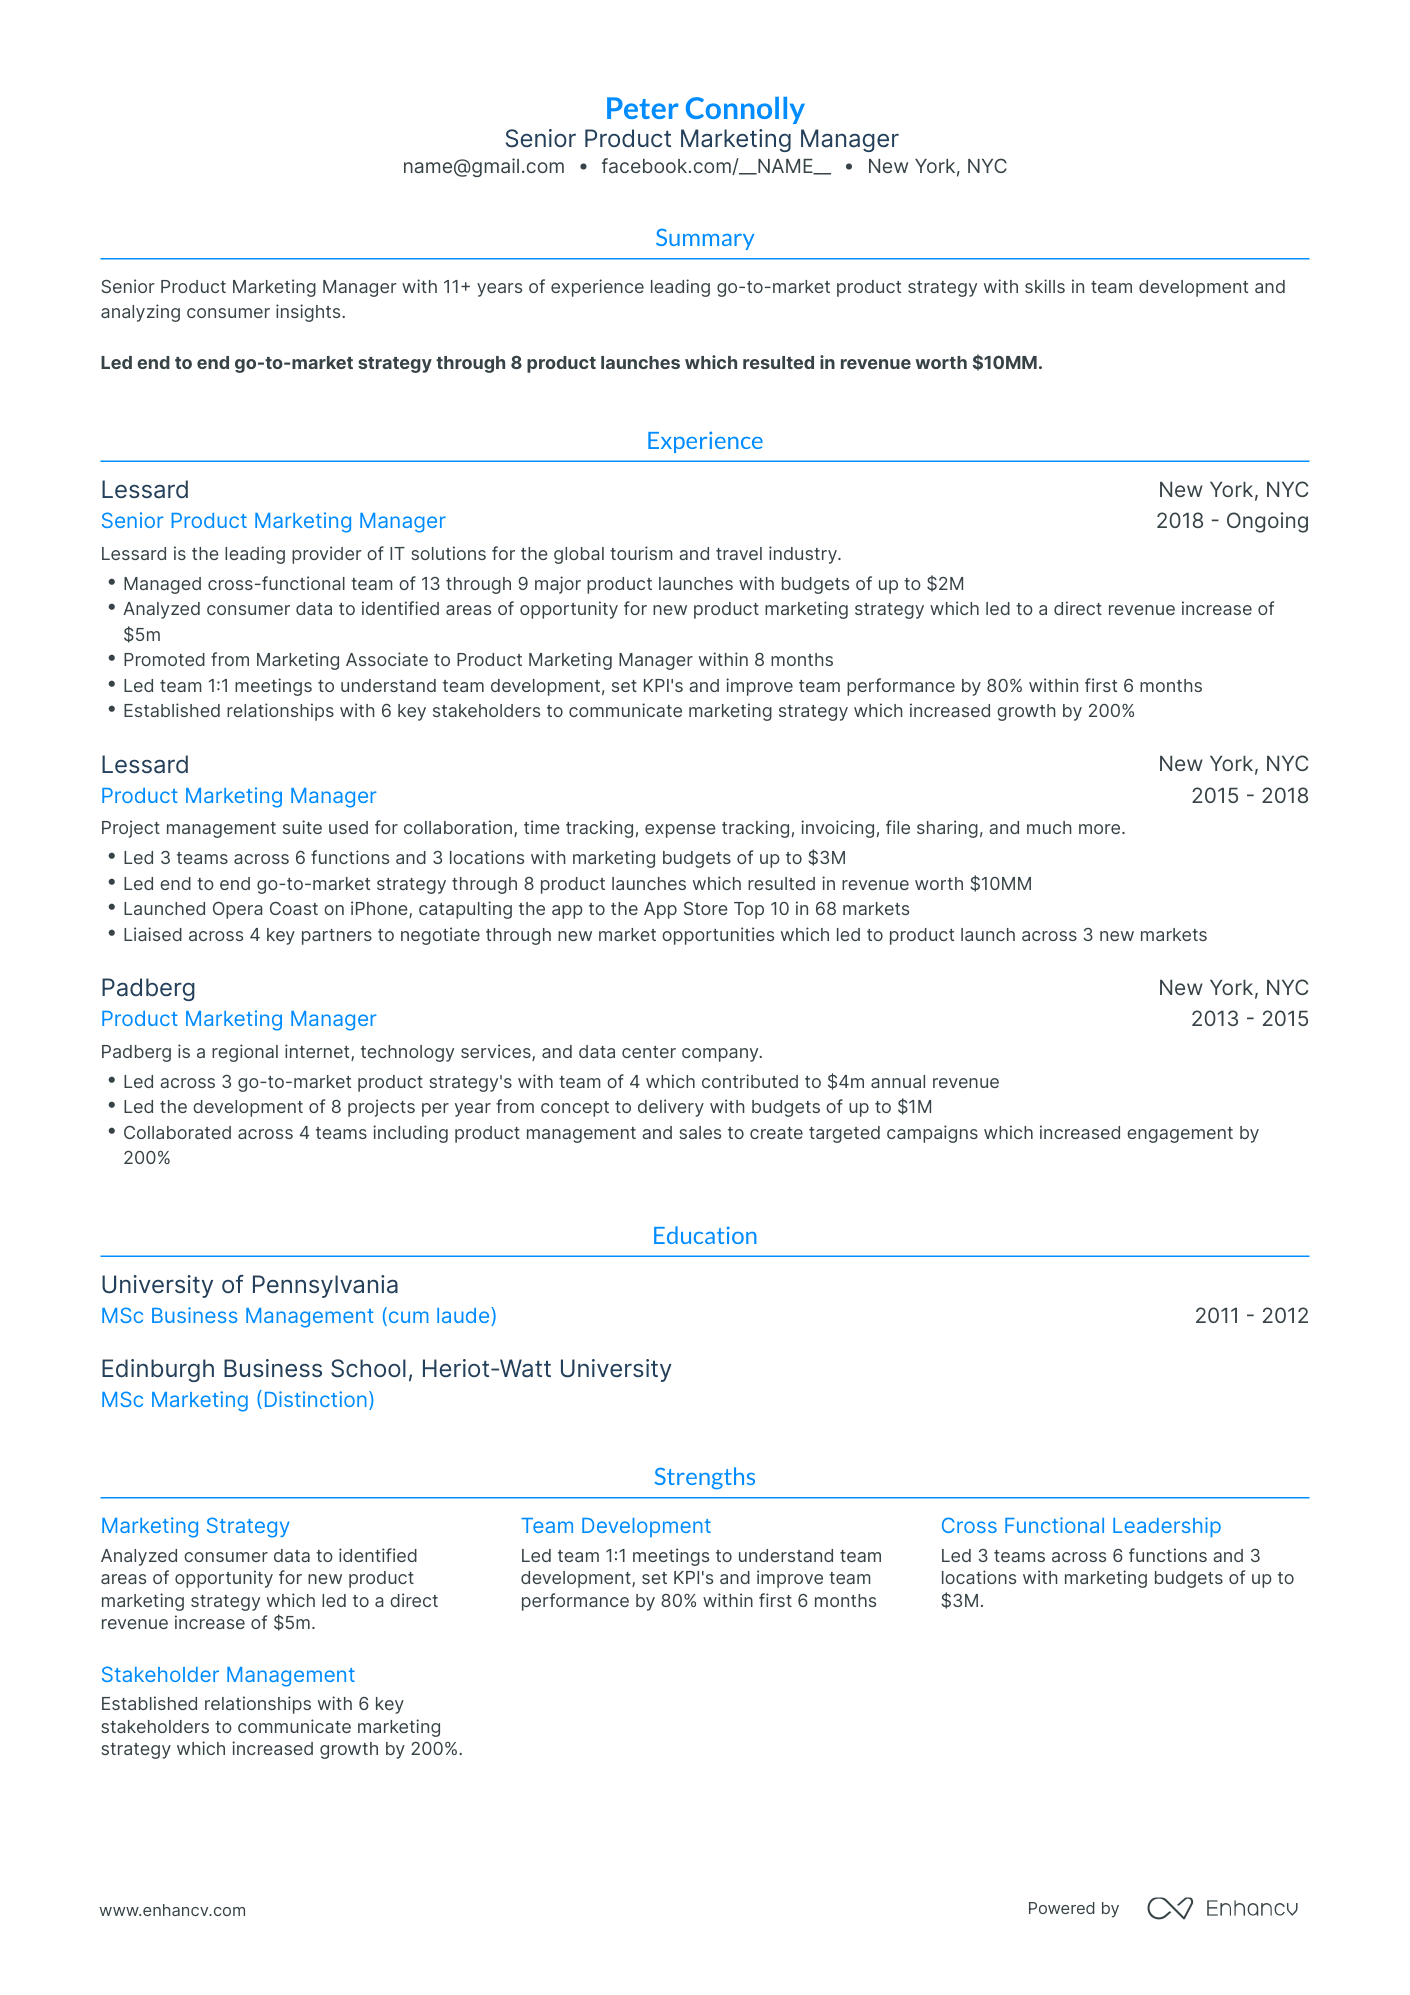 Traditional Product Marketing Manager Resume Template